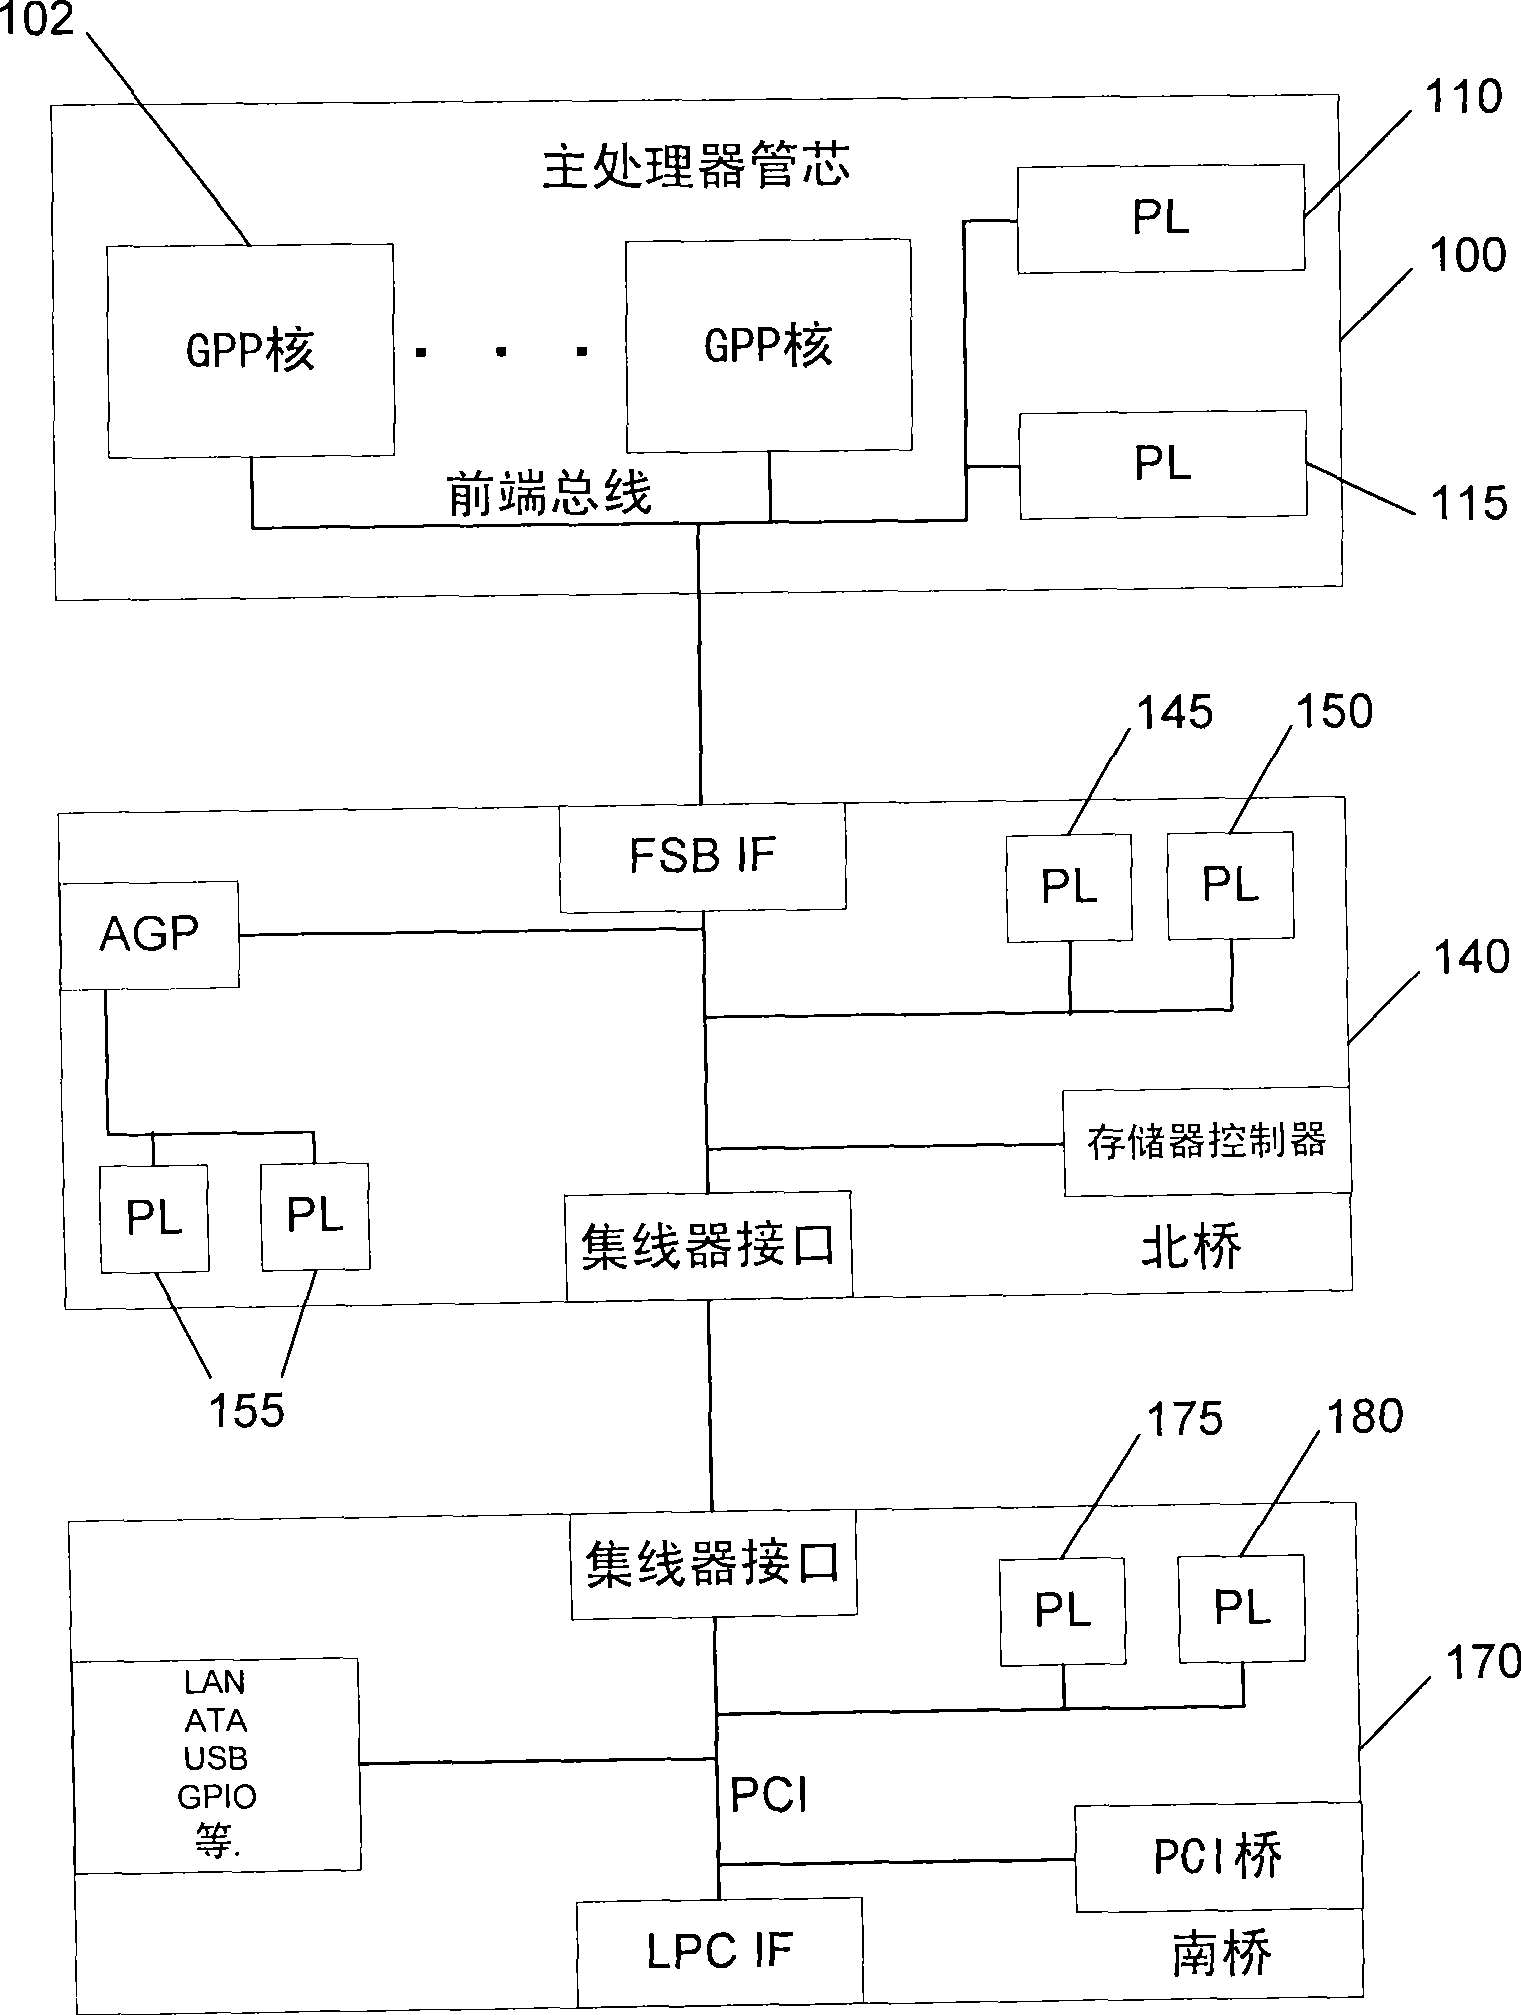 Integrating programmable logic into personal computer (pc) architecture